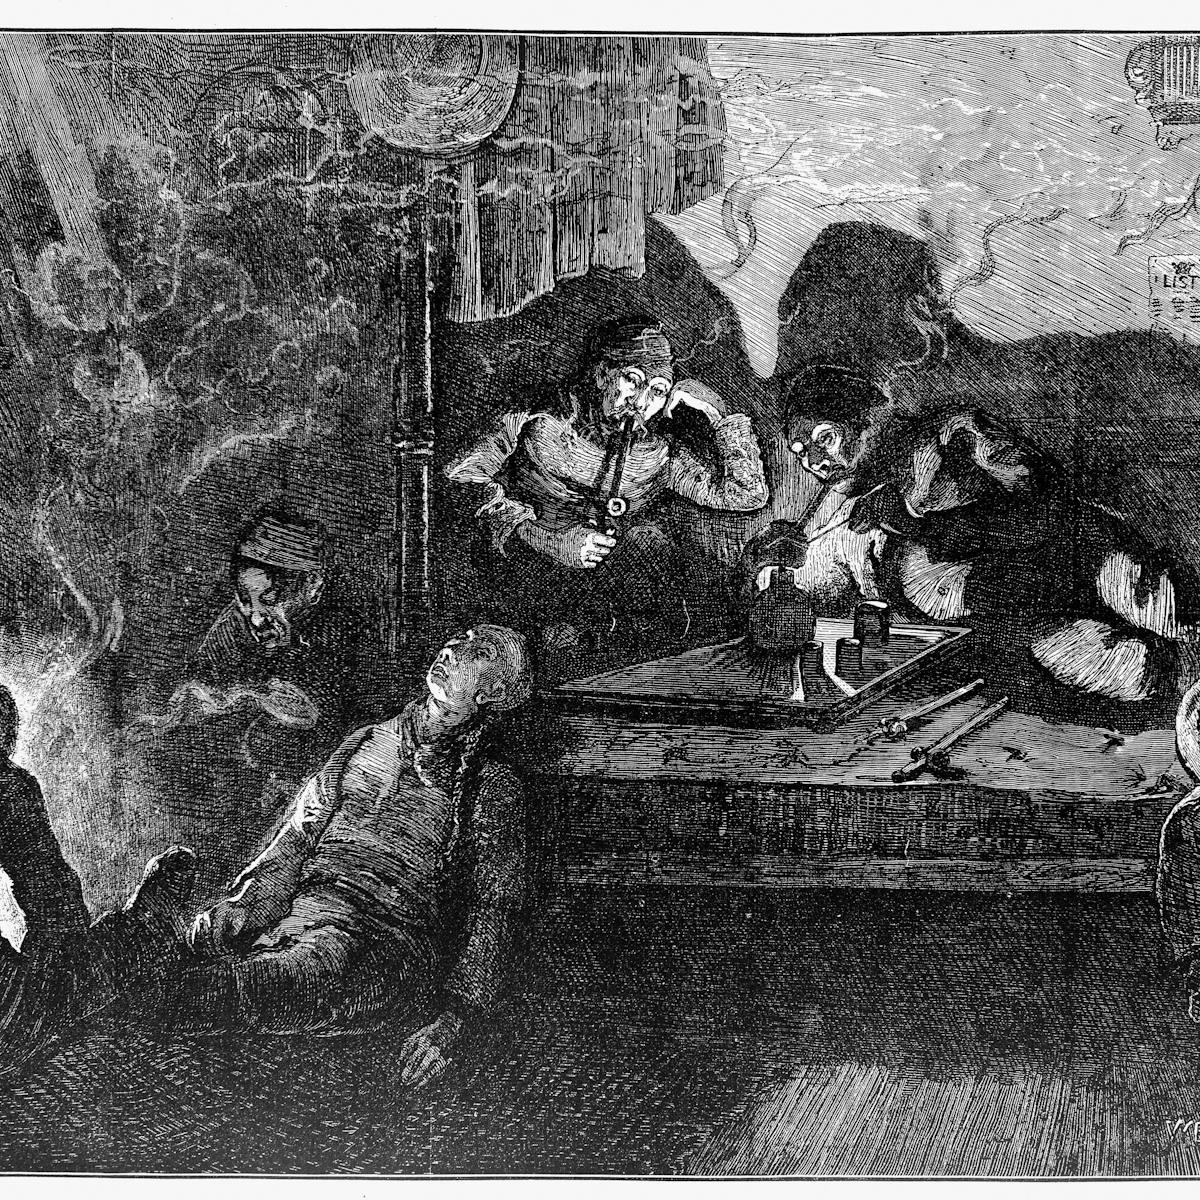 A black-and-white illustration of men smoking opium while others are passed out